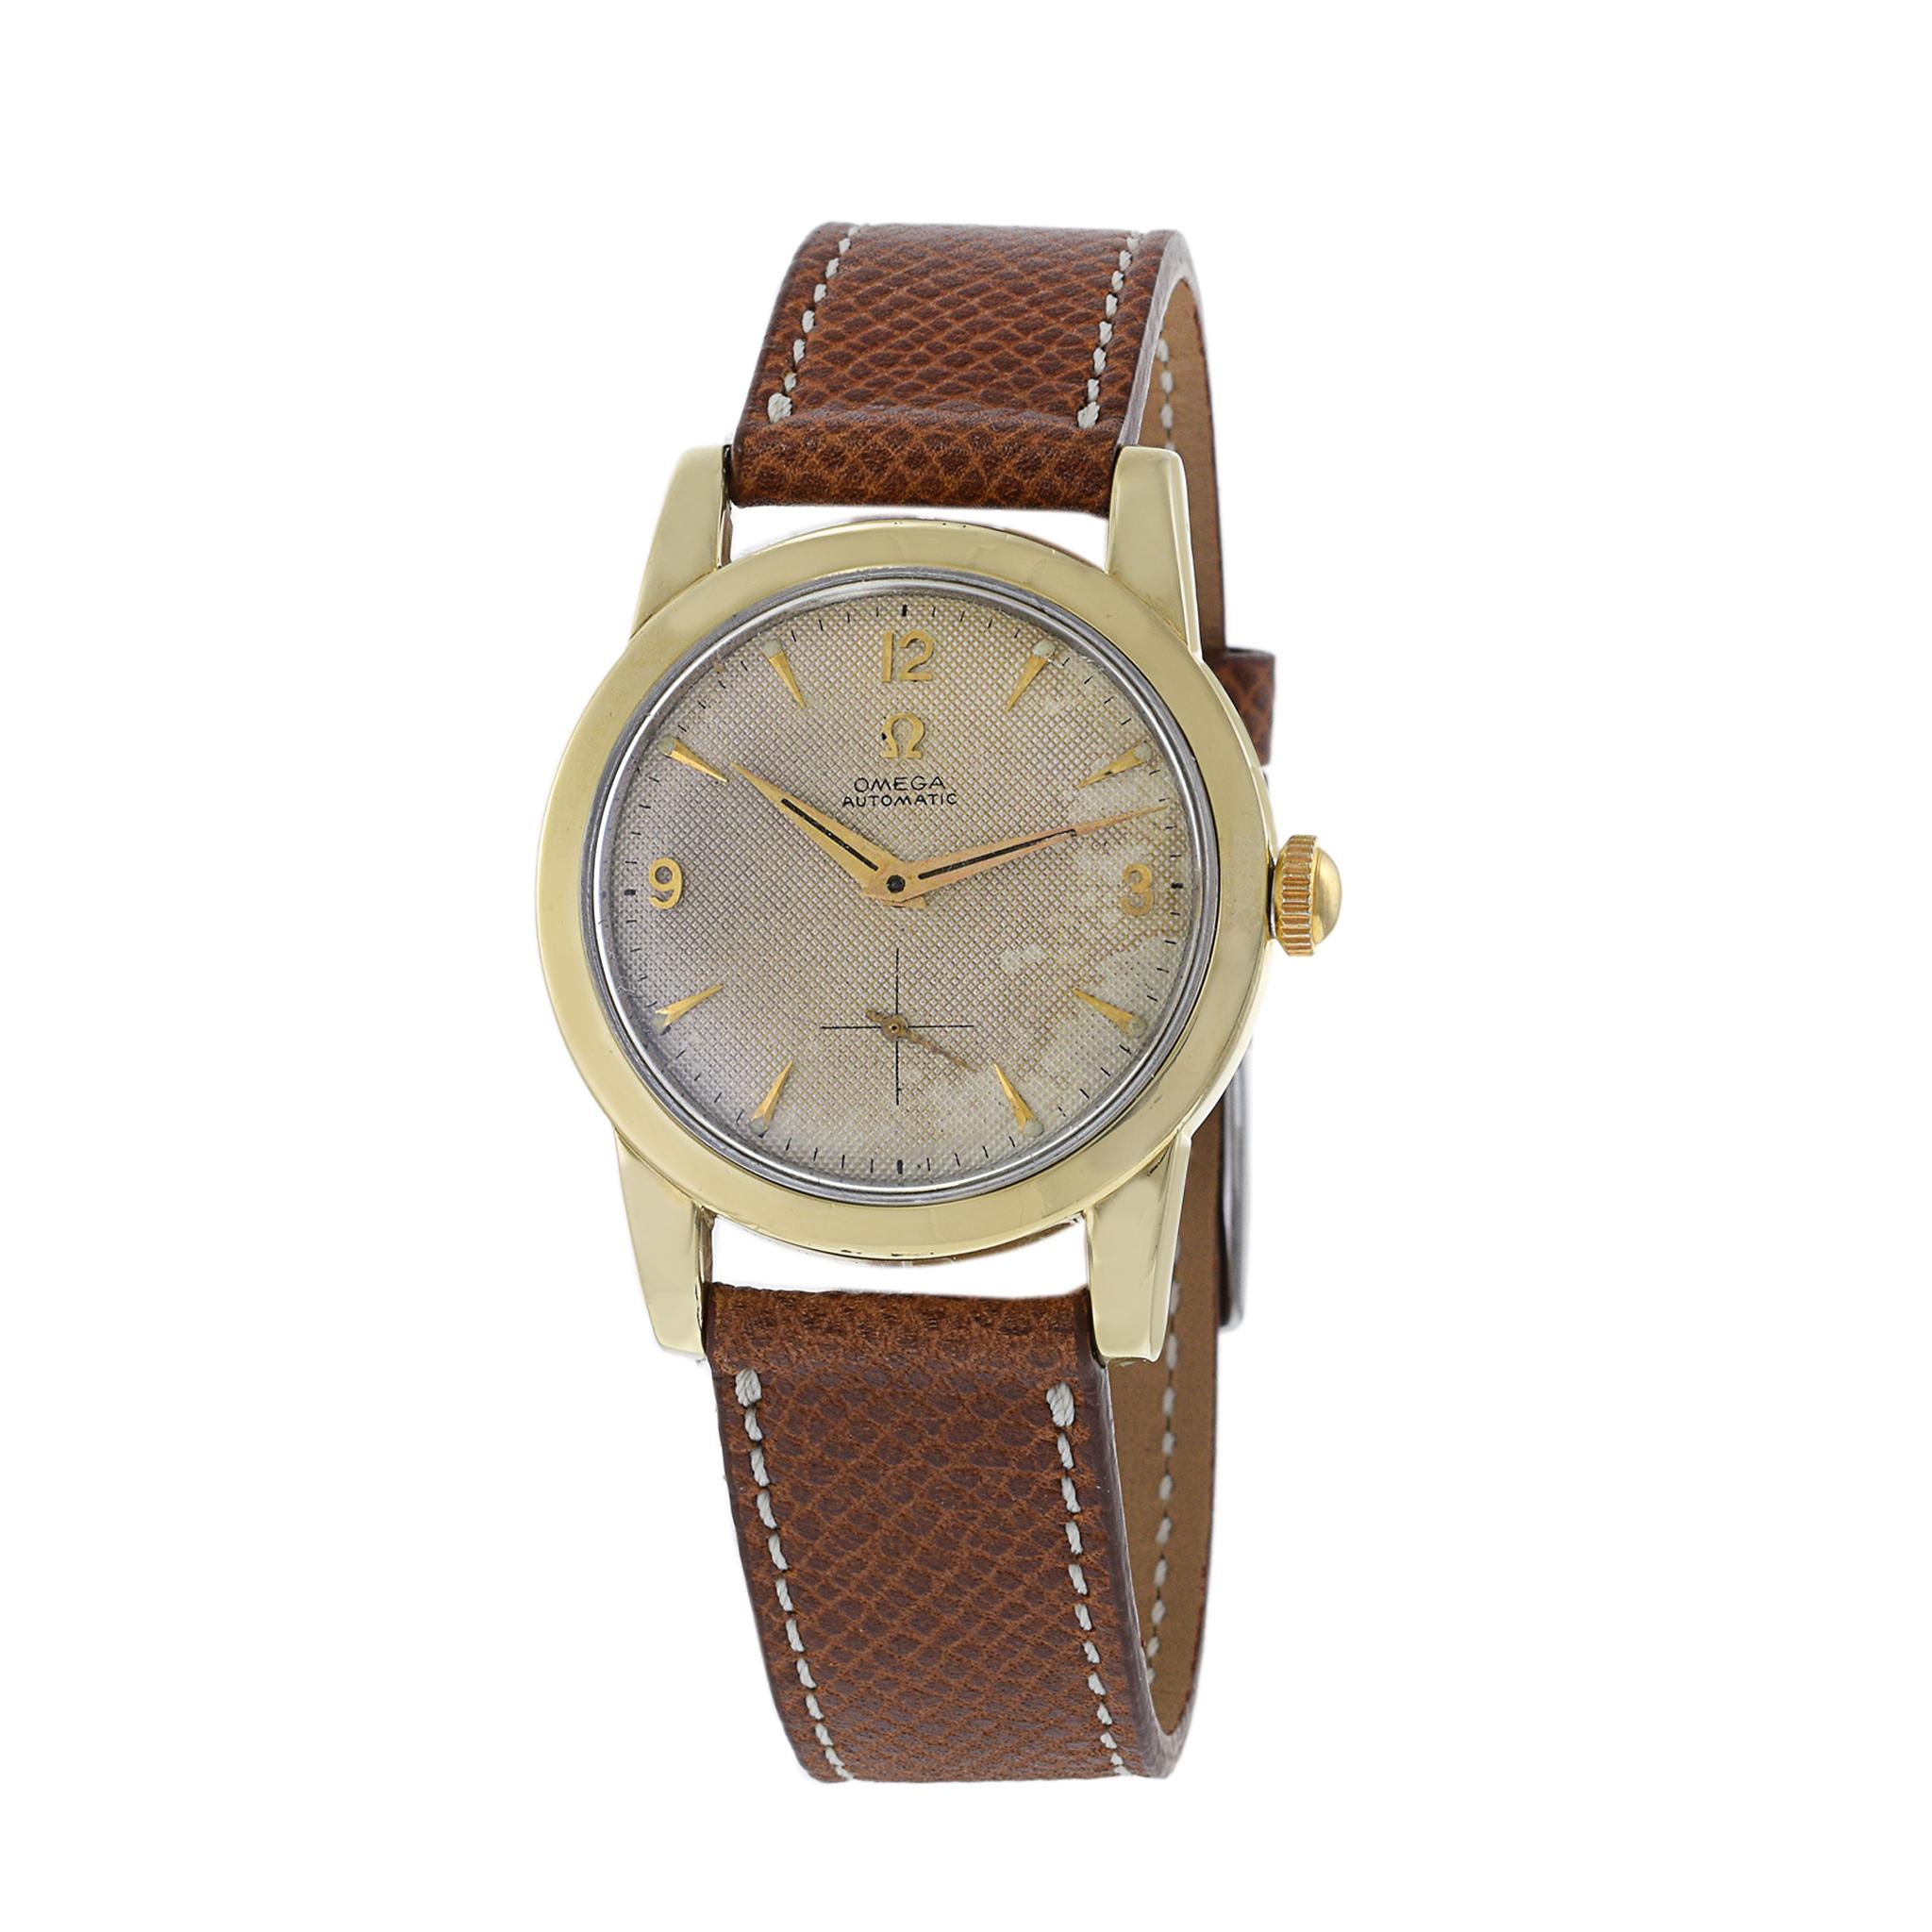 This is a nice condition 1954 Omega Seamaster with honeycomb dial. The bezel is solid 14K yellow gold and the lugs are gold top. The case is 34mm in diamter and appears unpolished. The dial has applied gold hour indices and gold hands.

The watch is